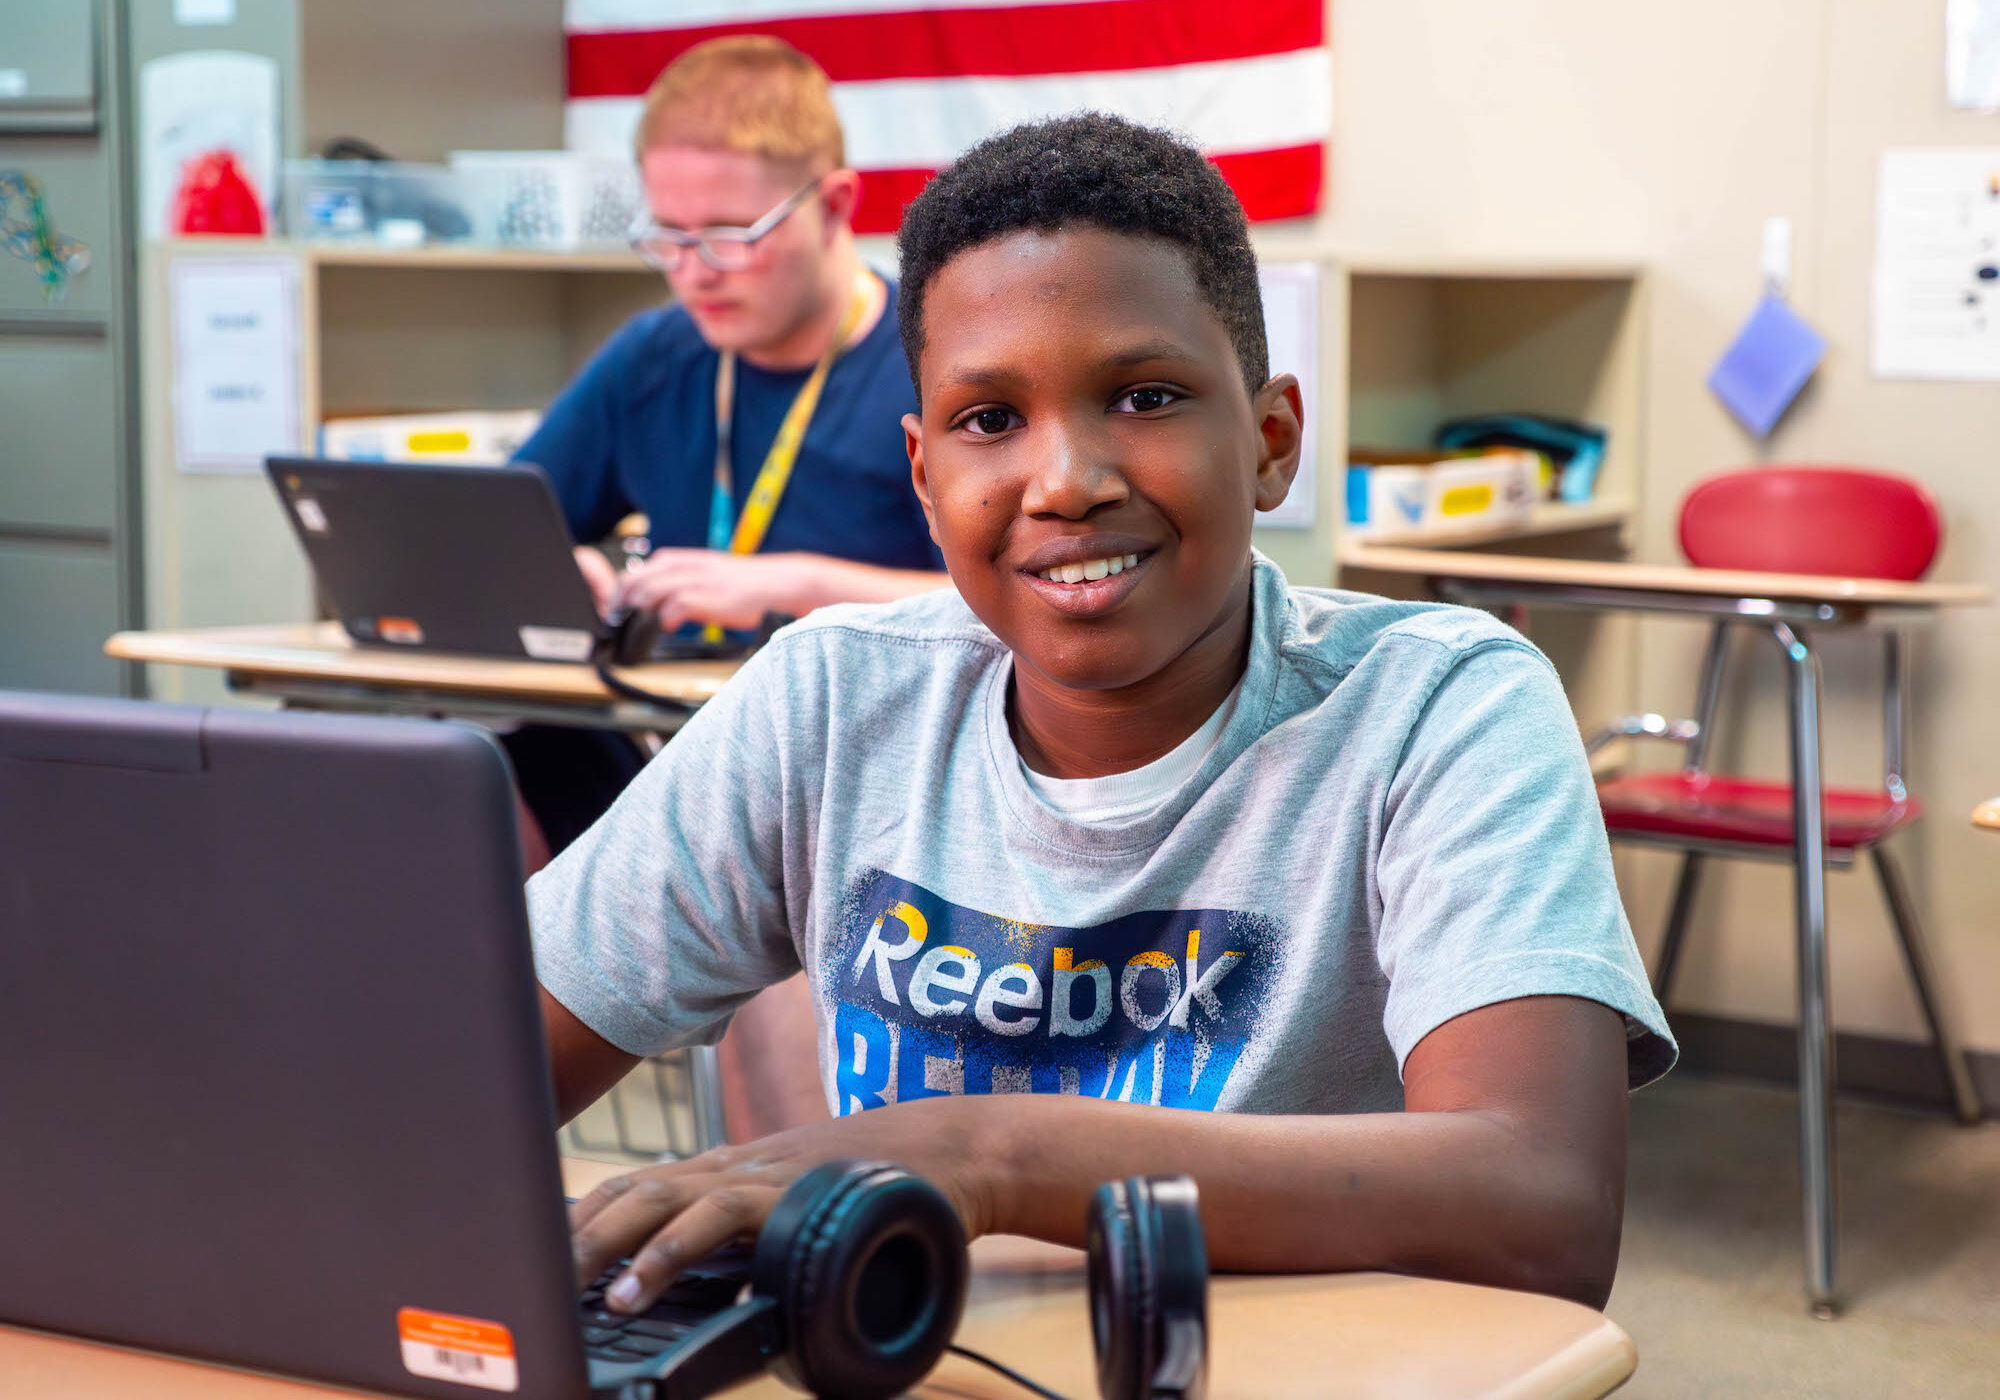 Student smiling and working on computer in the classroom